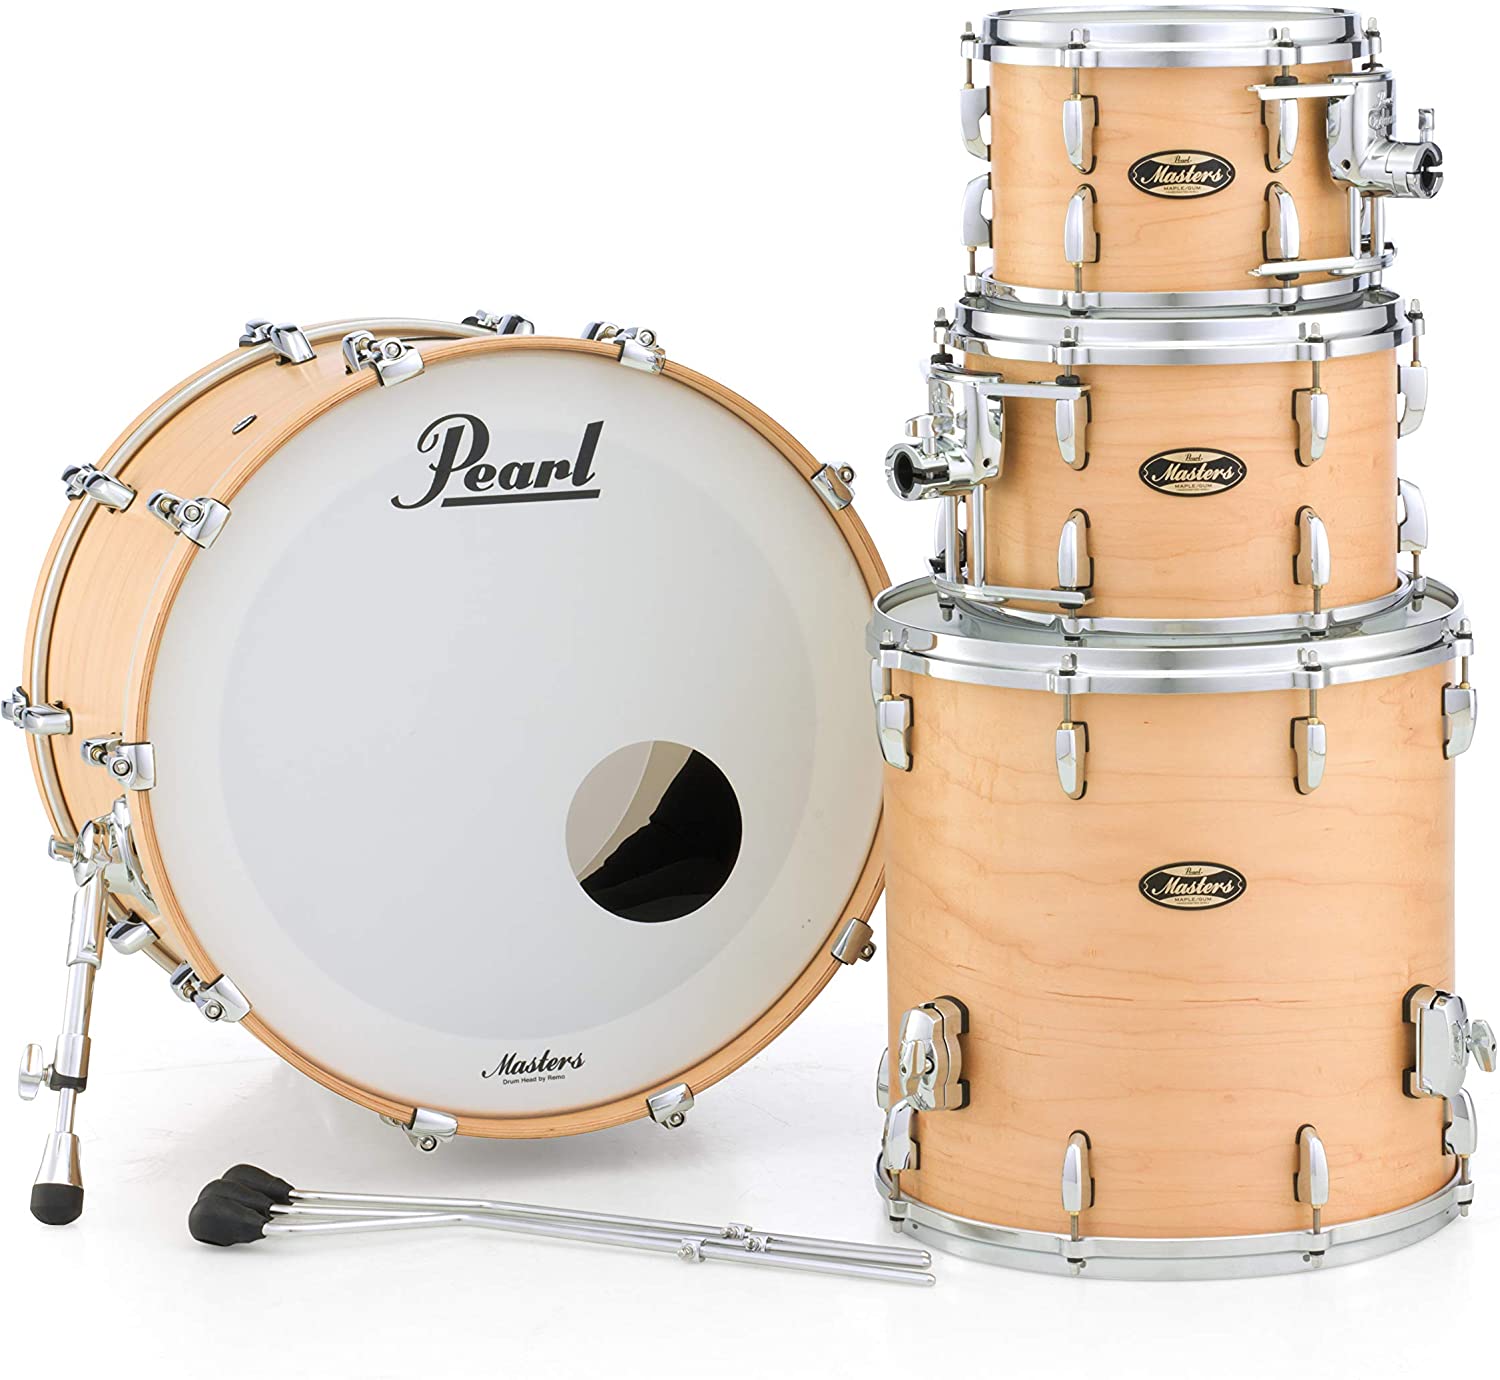 PEARL Master Maple Gum 5-pc Drum Shell Kit (Available in 2 Colors)